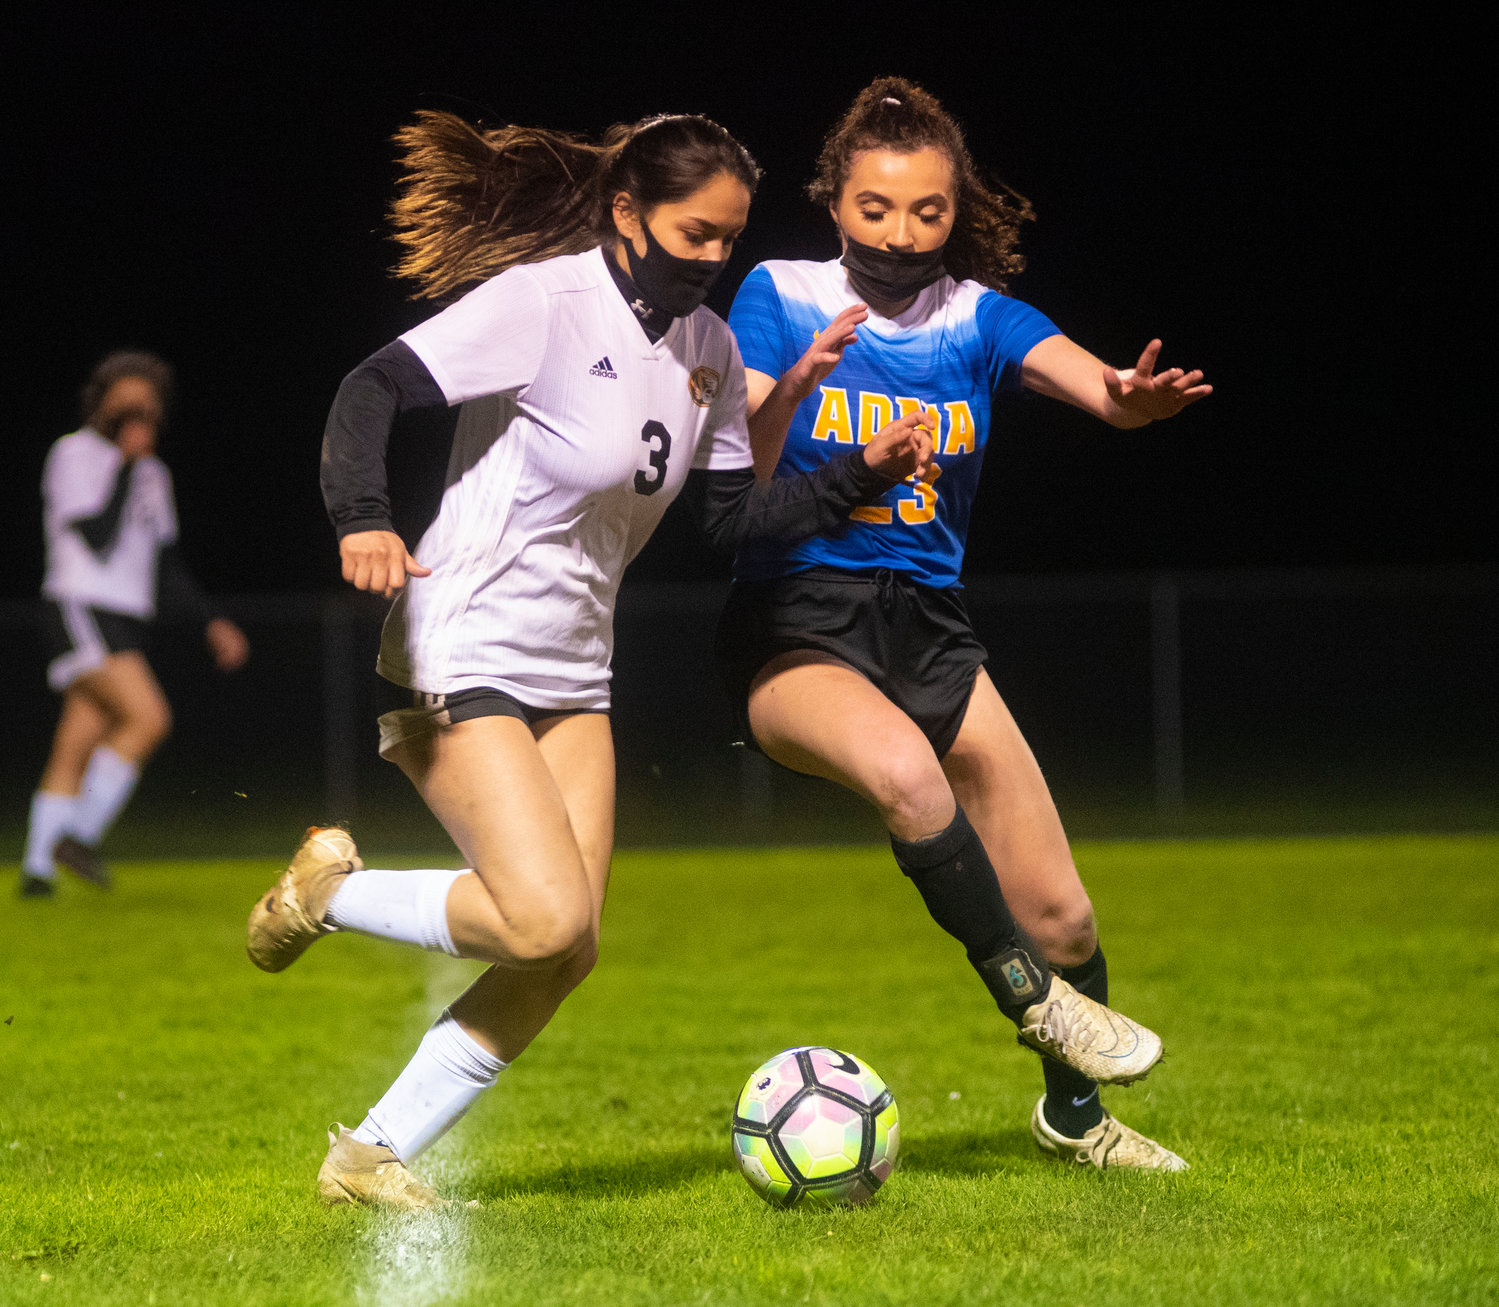 Napavine's Natalya Marcial (3) and Adna's Presley Smith battle for the ball on Wednesday.